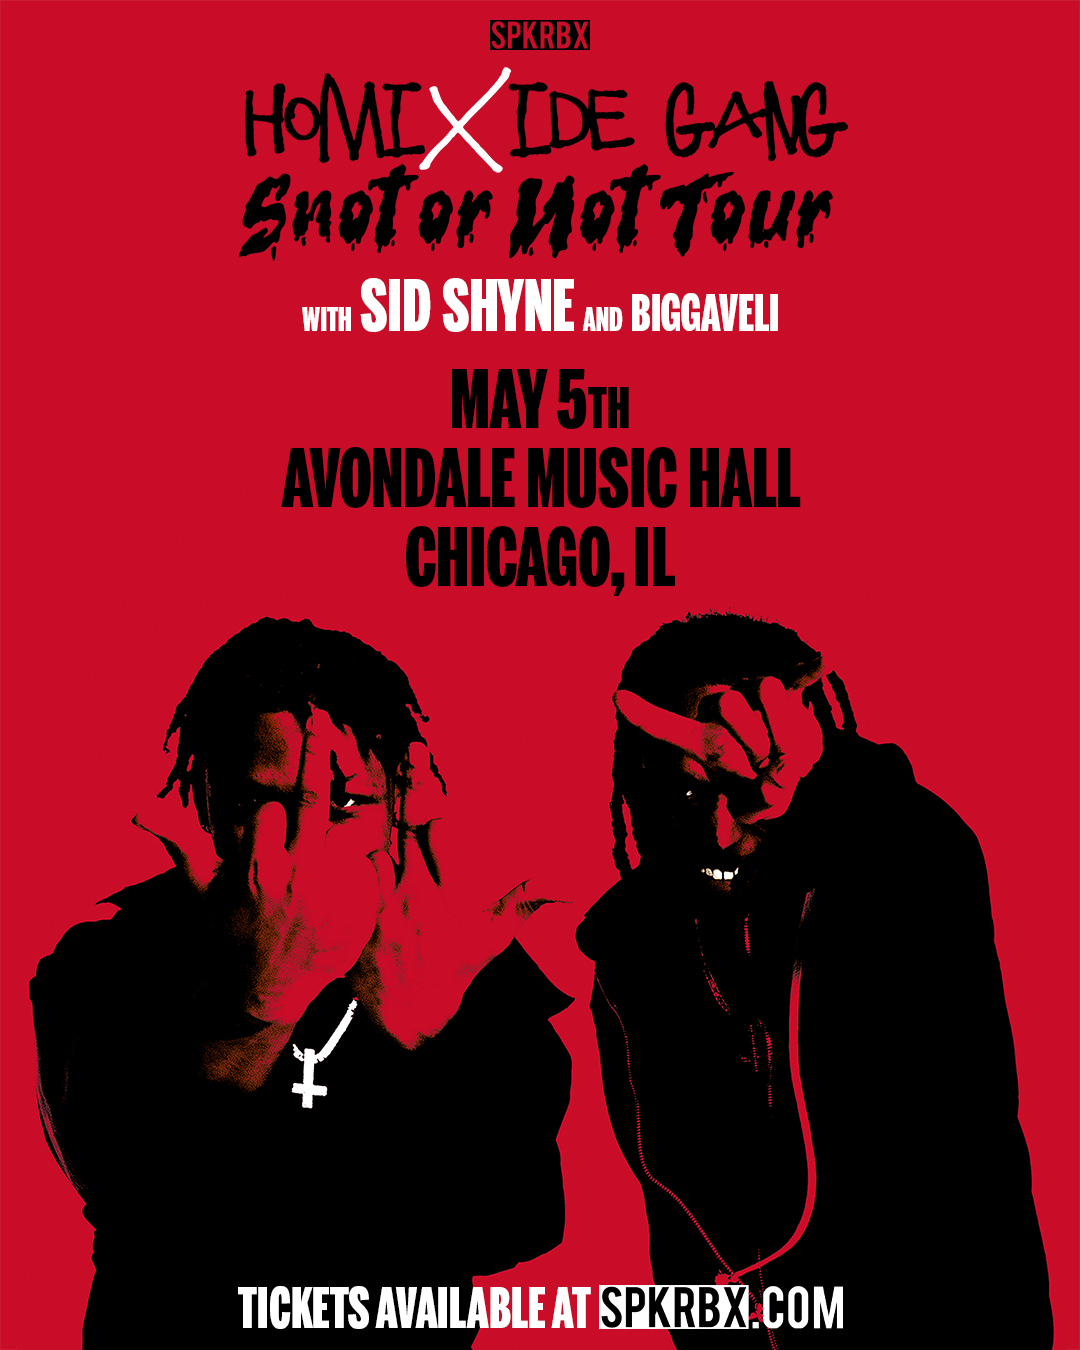 Buy tickets to Homixide Gang Snot or Not Tour in Chicago on May 5, 2023